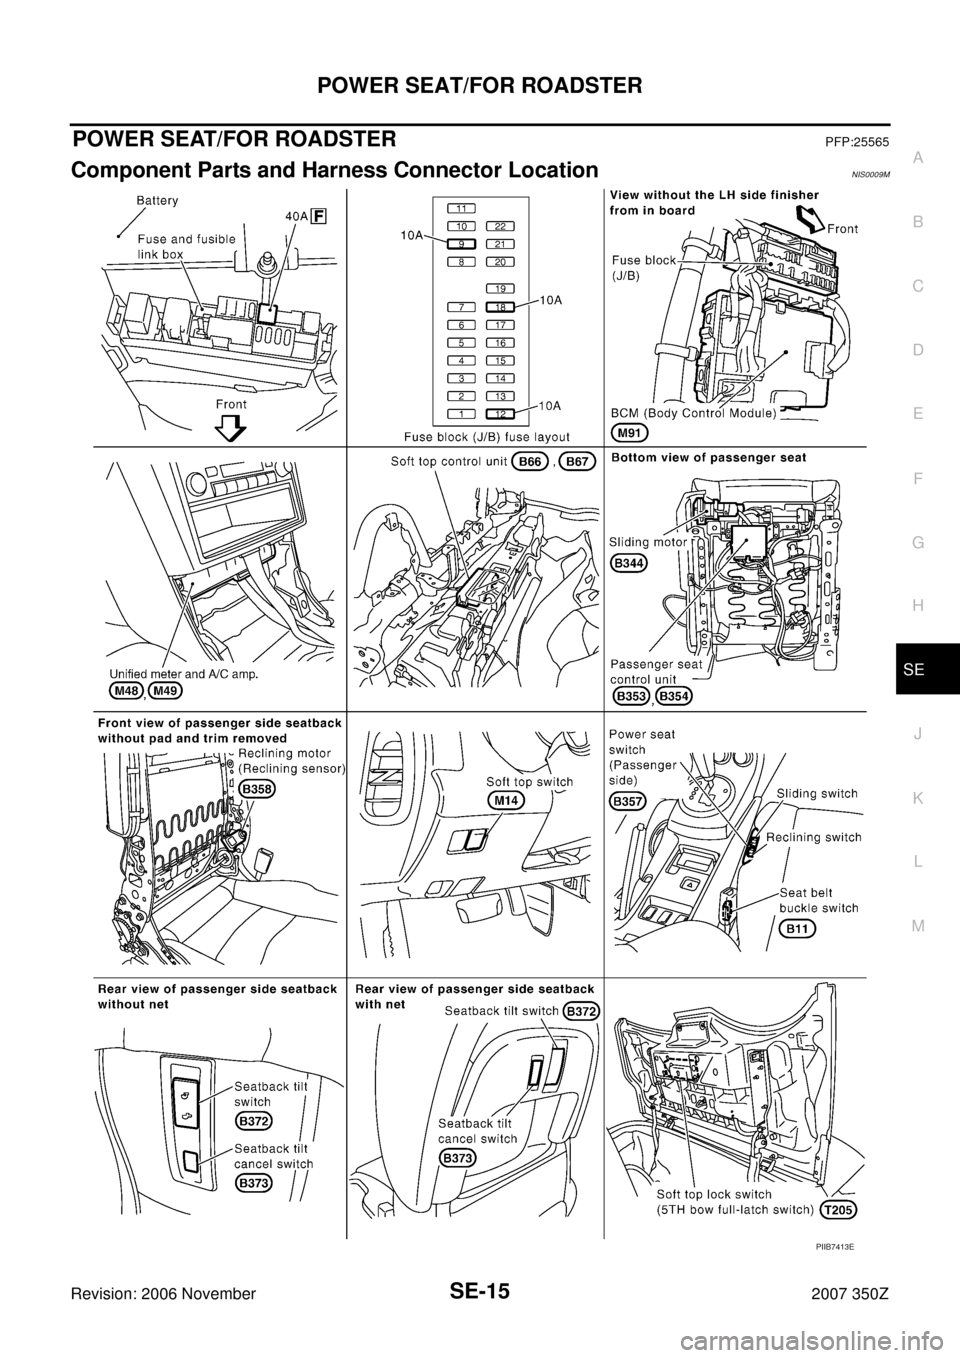 NISSAN 350Z 2007 Z33 Seat User Guide POWER SEAT/FOR ROADSTER
SE-15
C
D
E
F
G
H
J
K
L
MA
B
SE
Revision: 2006 November2007 350Z
POWER SEAT/FOR ROADSTERPFP:25565
Component Parts and Harness Connector LocationNIS0009M
PIIB7413E 